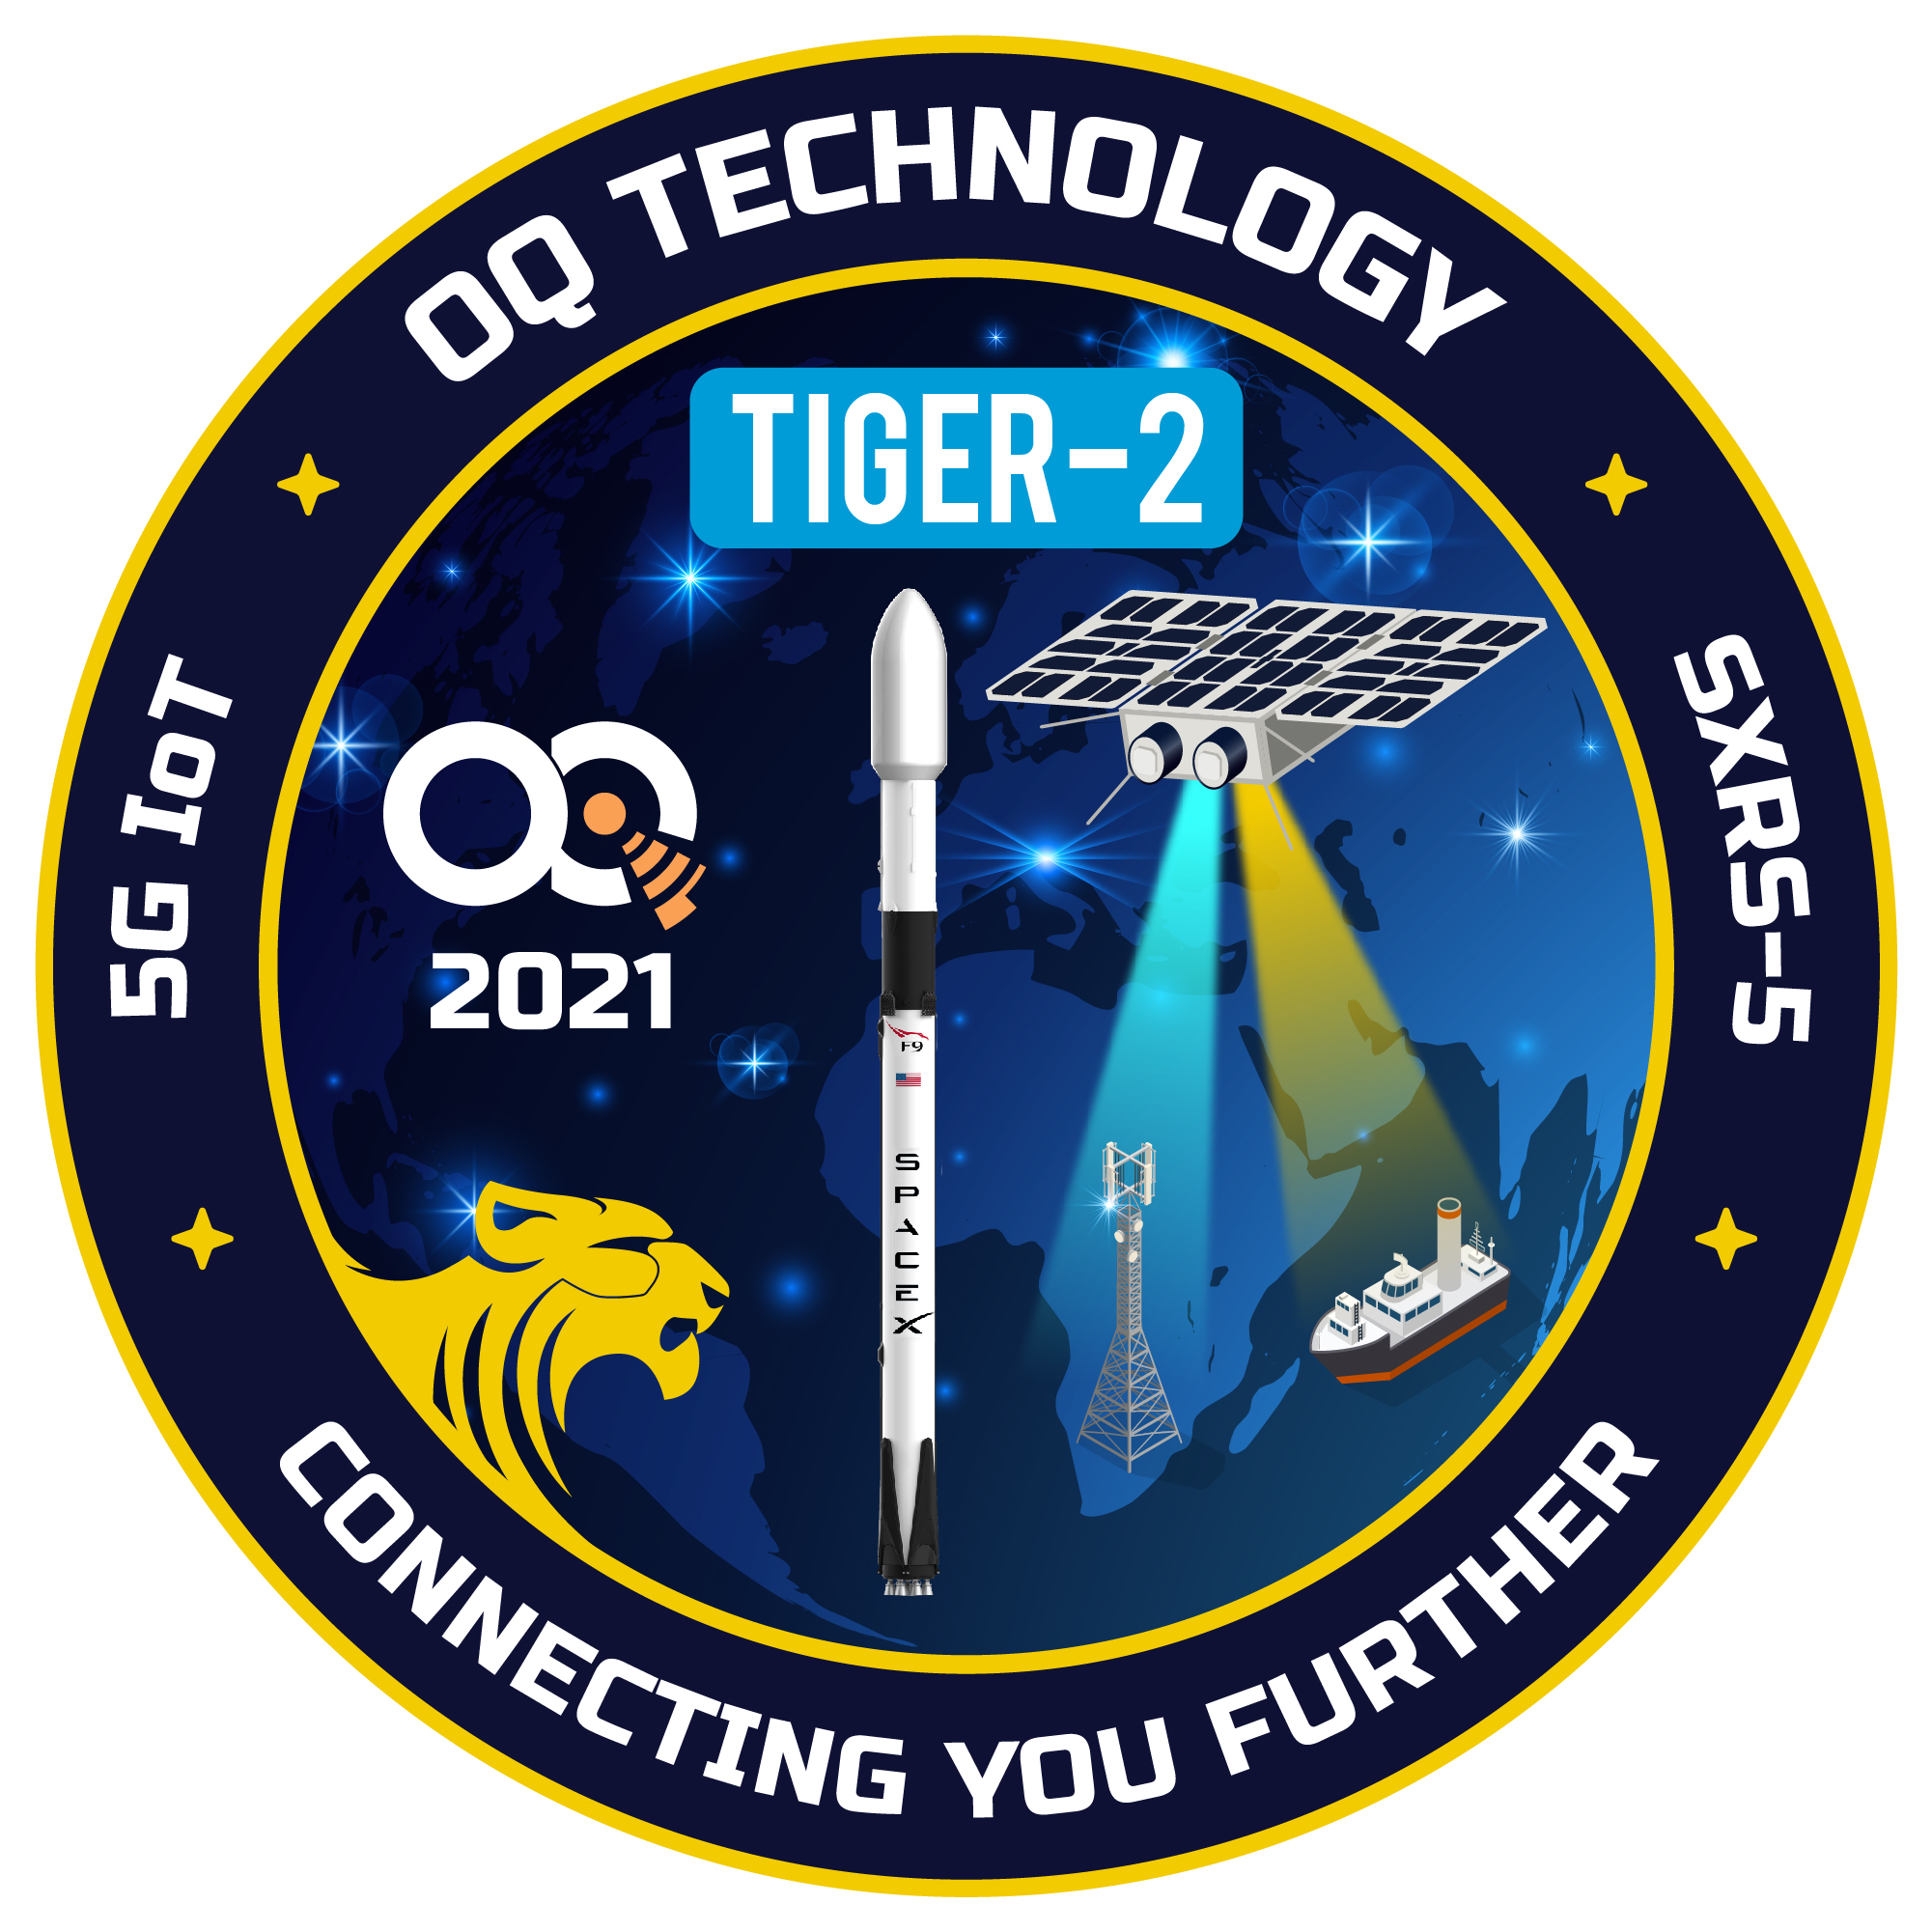 Tiger-2 Mission Patch